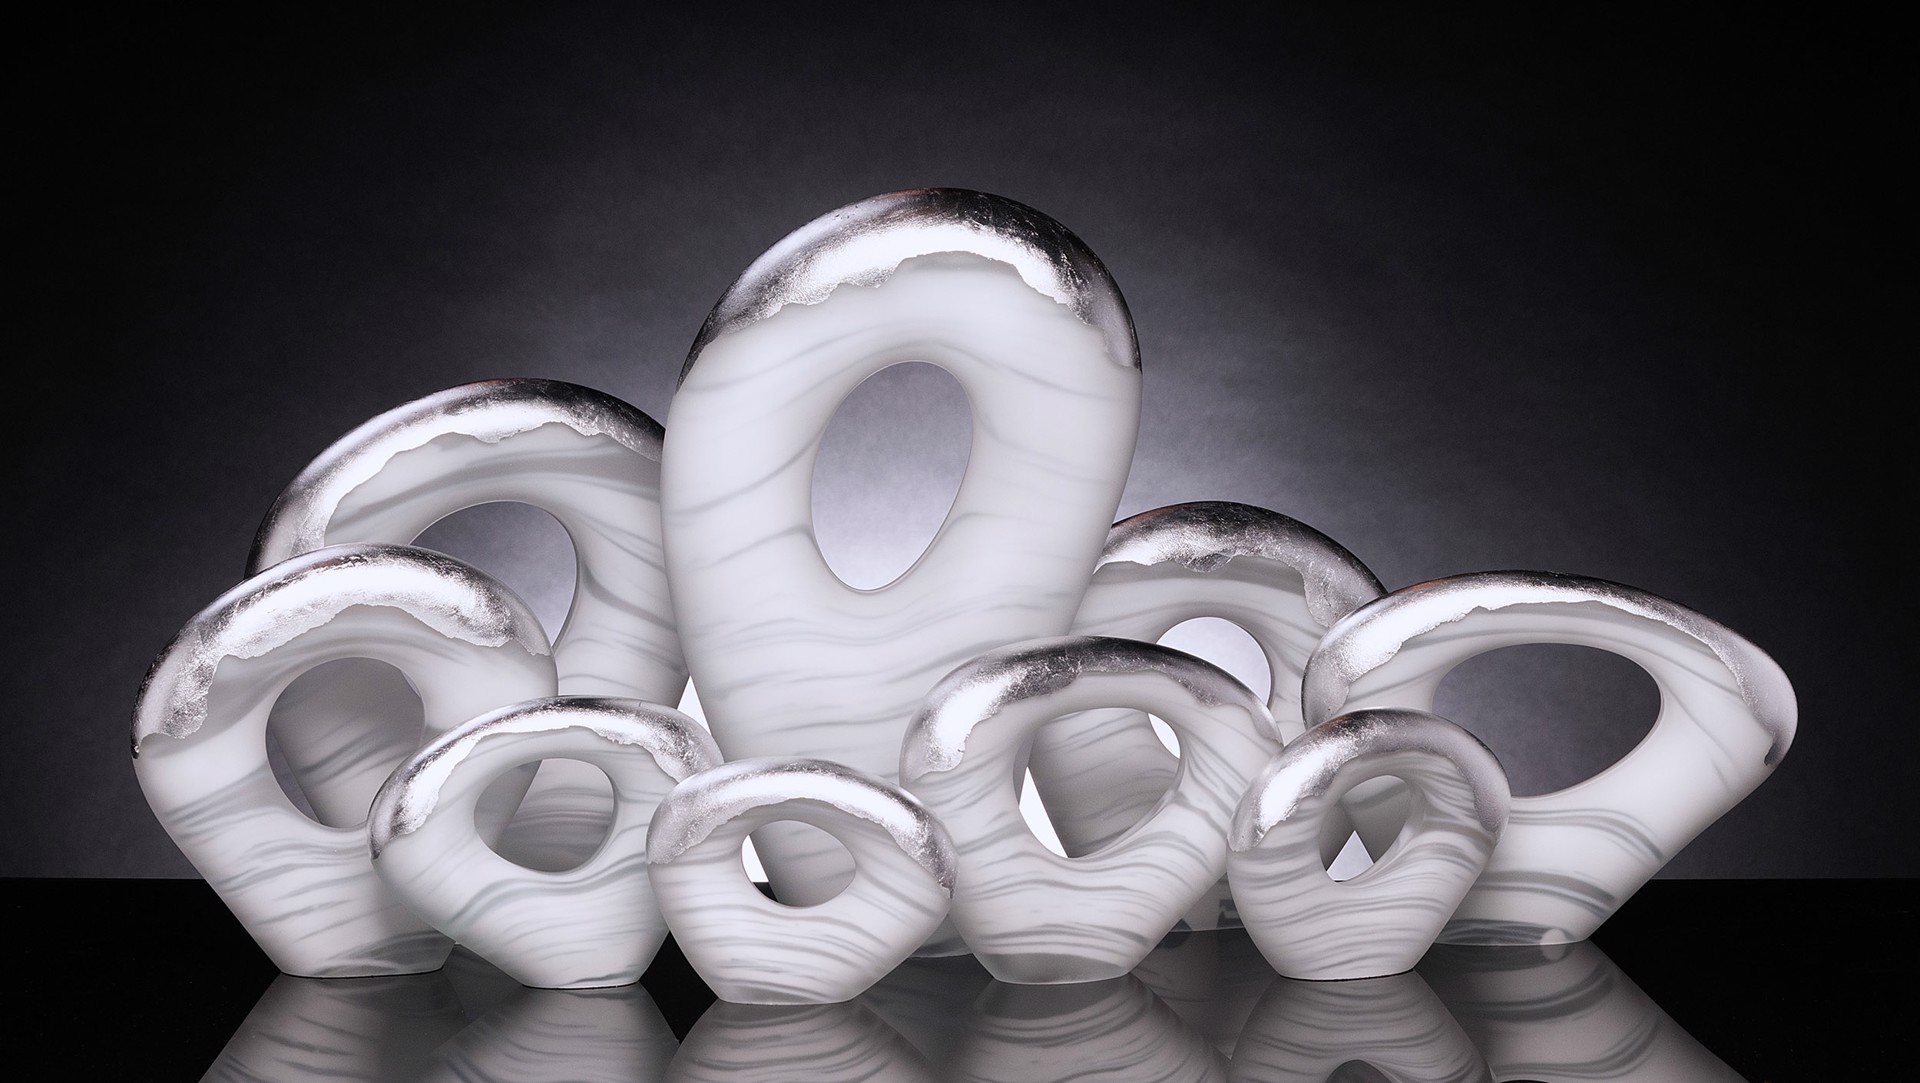 Silver Thoughts by Florida glass artist Rick Eggert is a beautiful nine piece set of hand blown glass with whisps of white pigment and silver leaf on the top.